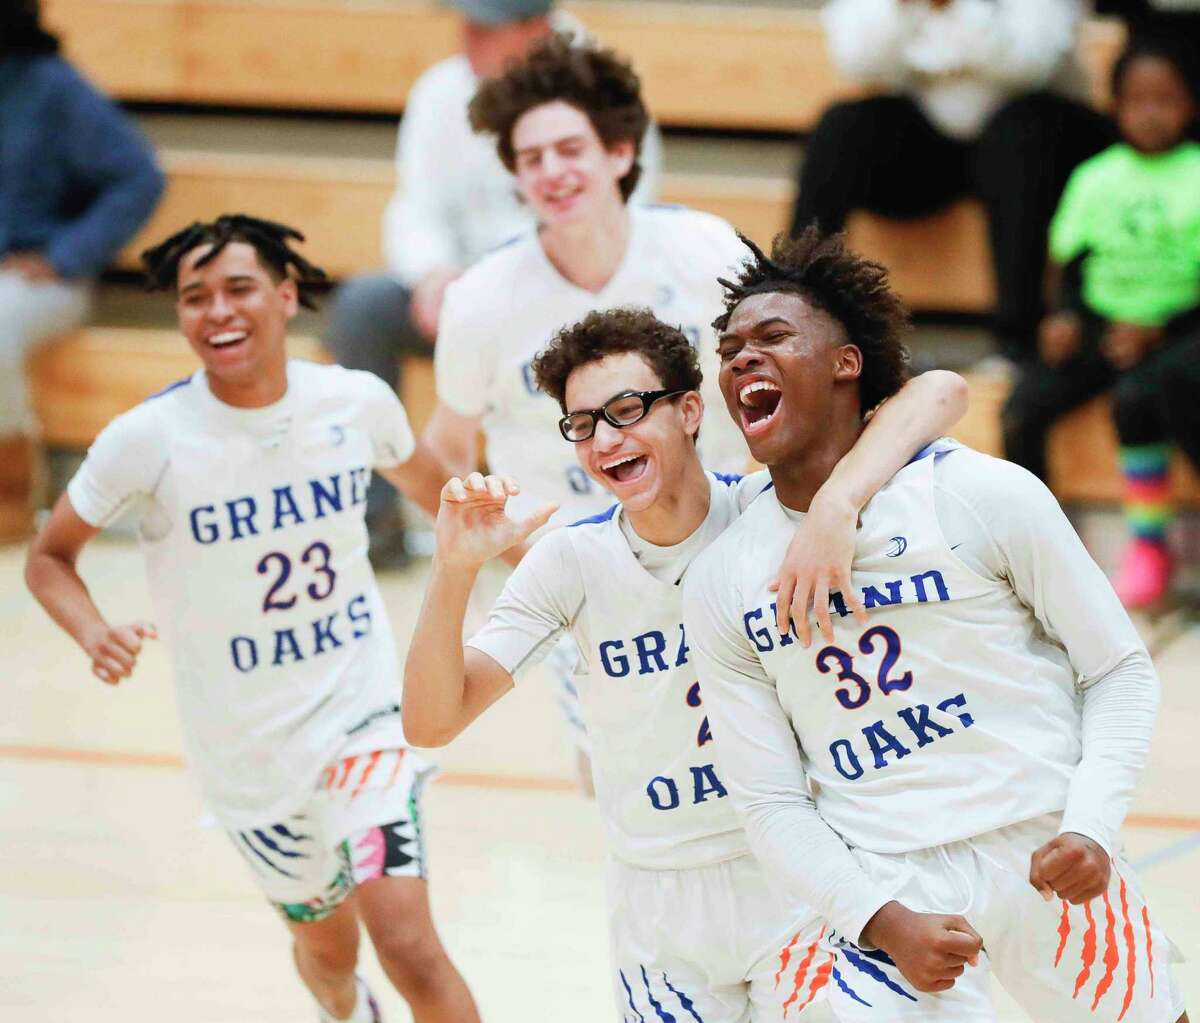 Grand Oaks forward Sammuel Nkassa (32) celebrates after hitting a shot at the buzzer to give the team a 61-59 win over Lake Creek during a non-district high school basketball game at Grand Oak Ridge School, Tuesday, Nov. 30, 2021, in Spring.